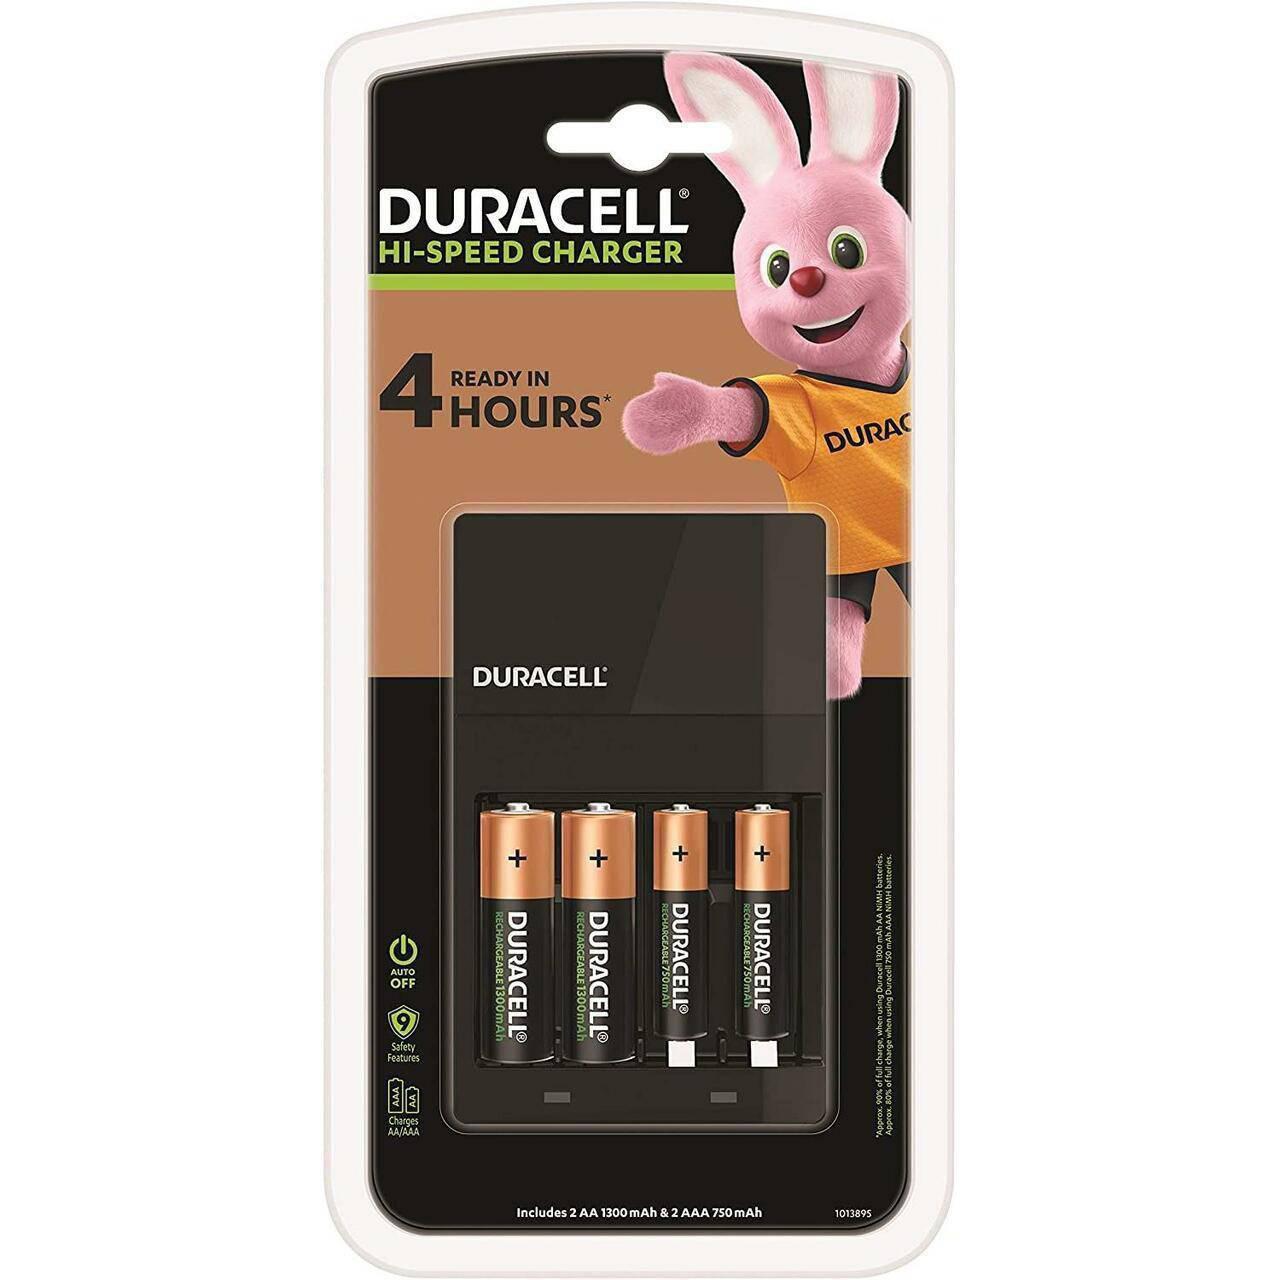 Duracell Hi-Speed Battery Charger with 2 AA and 2 AAA Rechargeable Batteries - Healthxpress.ie